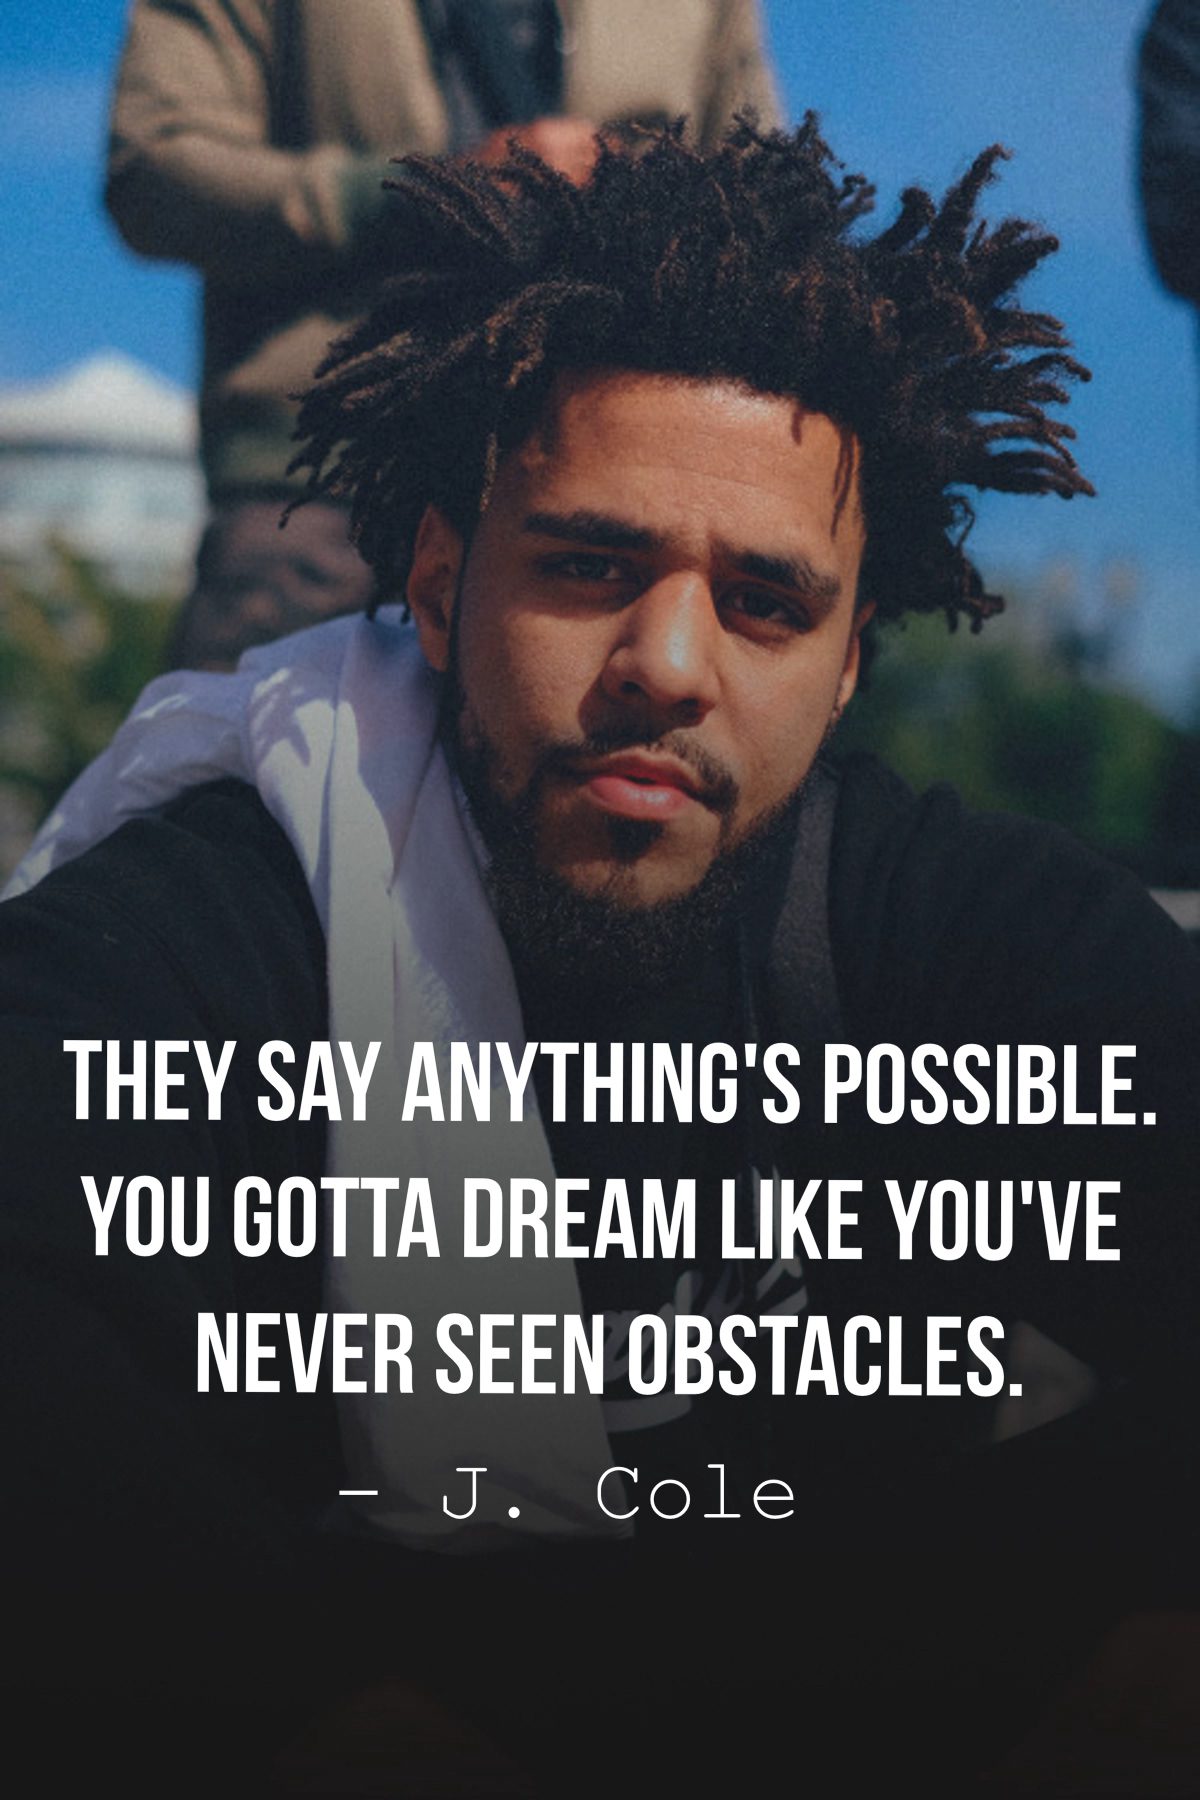 They say anything's possible. You gotta dream like you've never seen obstacles.